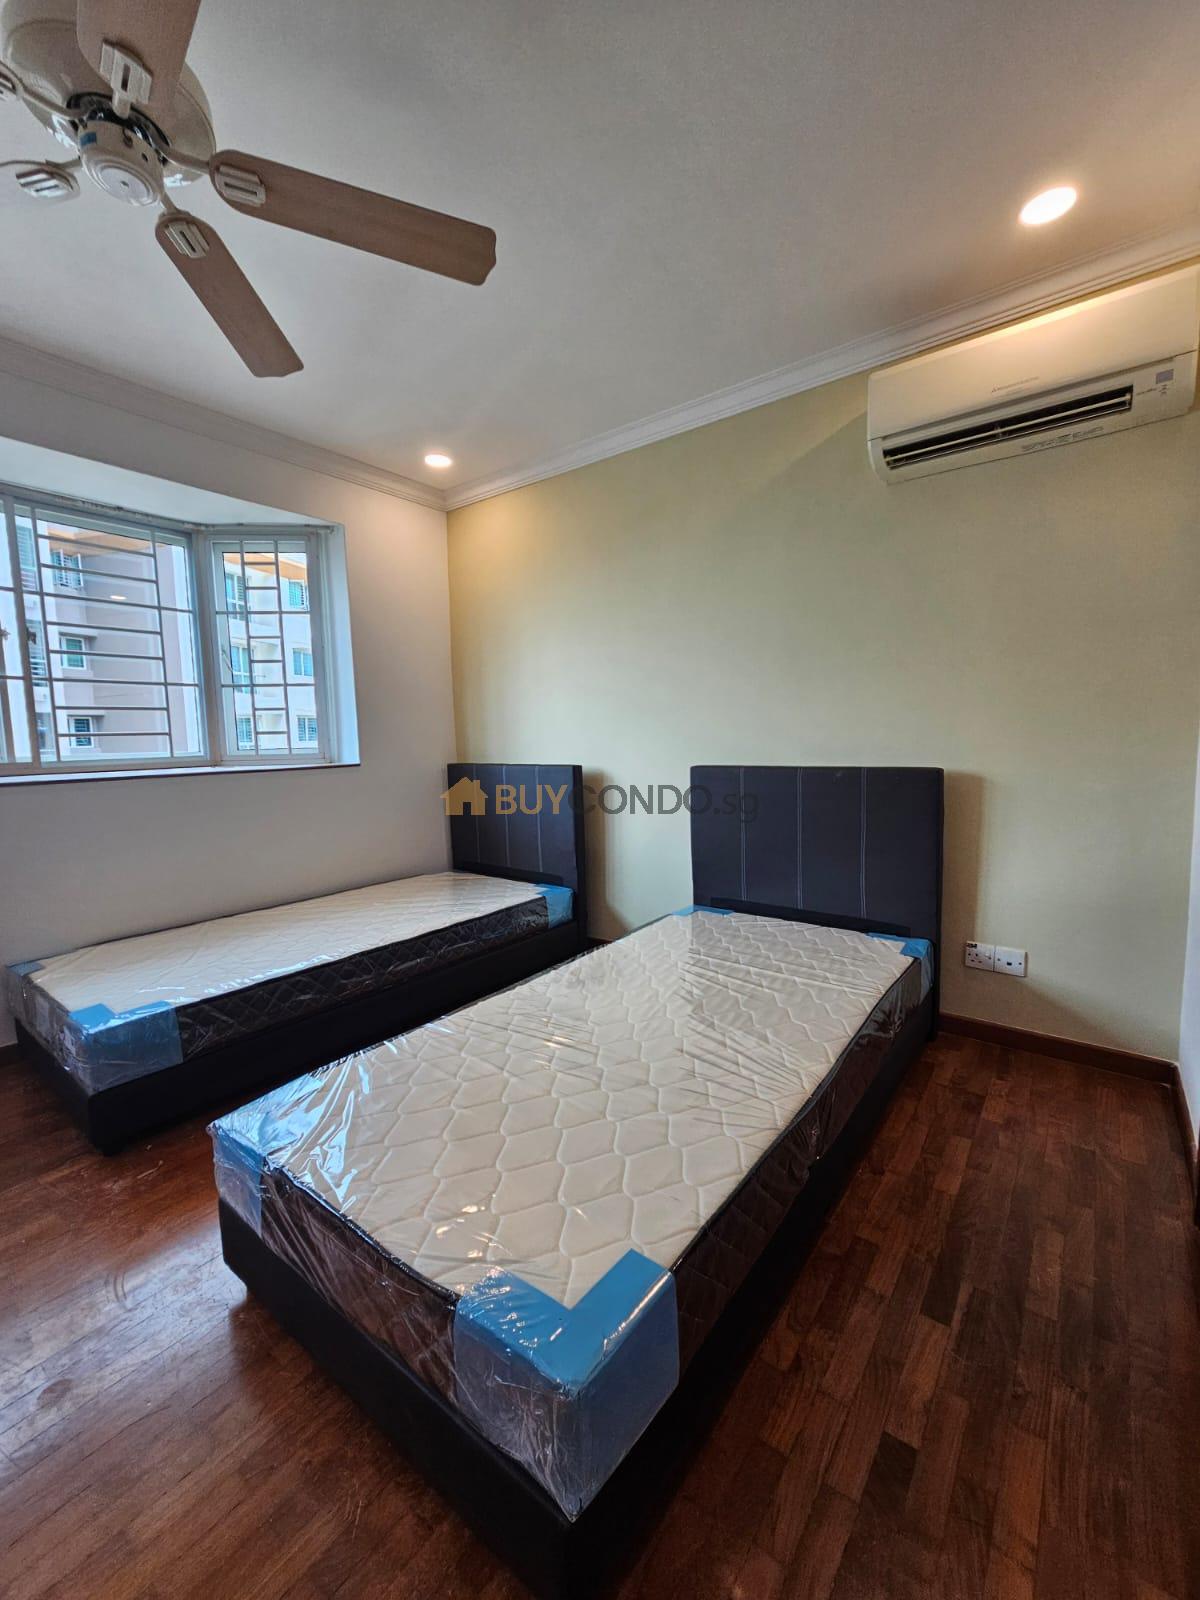 Estimated Cost for Converting a Condo Unit to a Co-living Apartment in Singapore